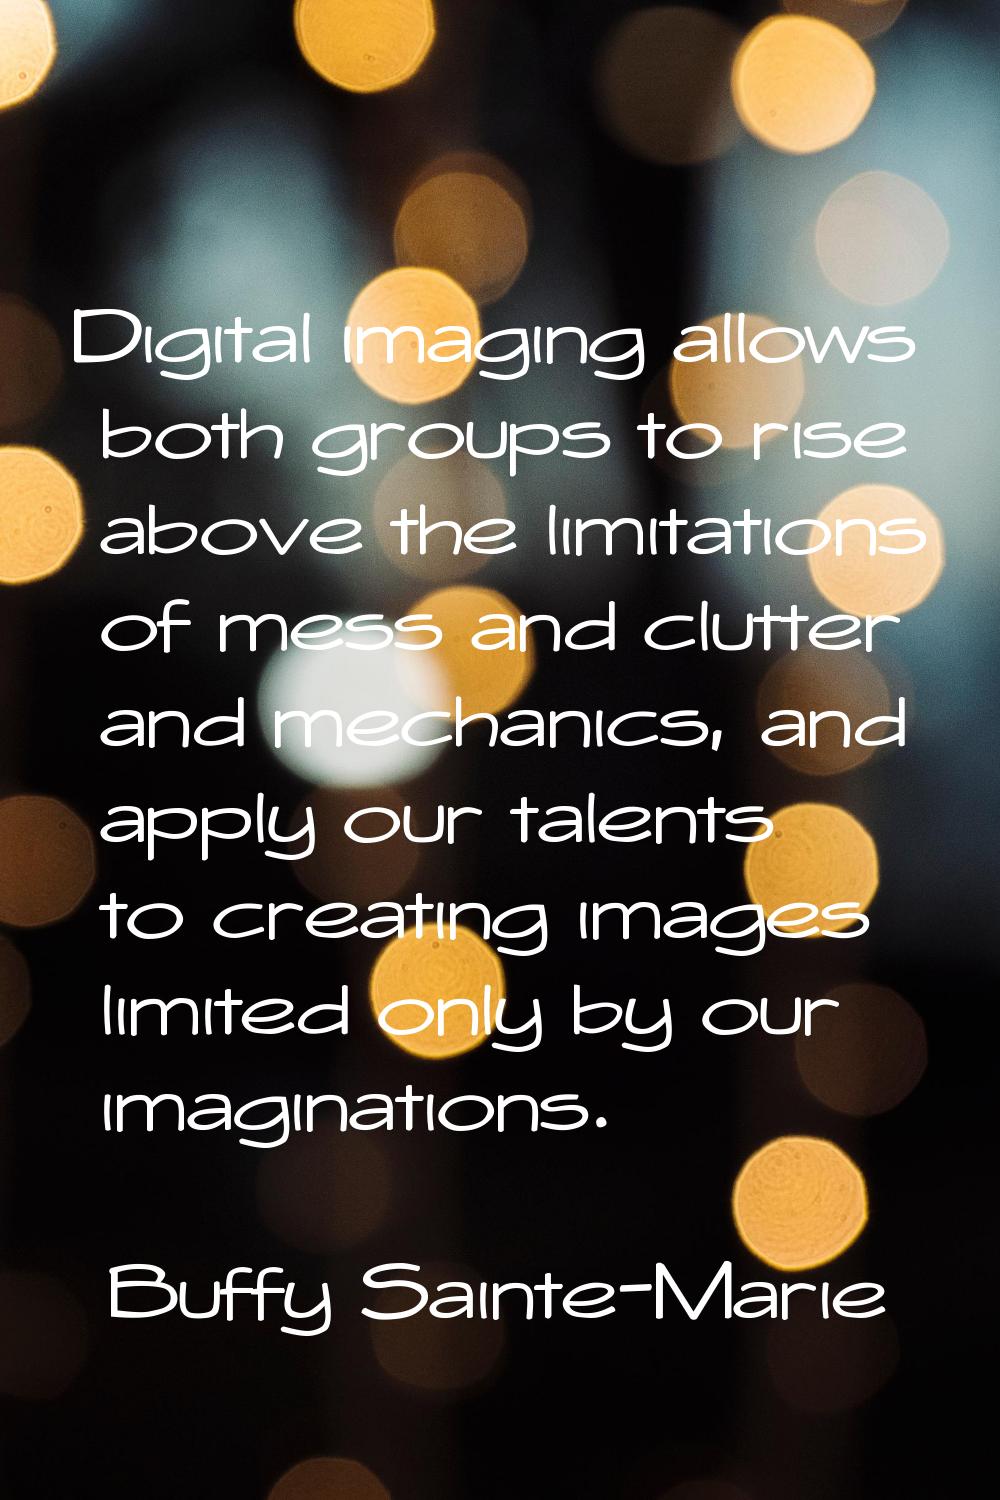 Digital imaging allows both groups to rise above the limitations of mess and clutter and mechanics,